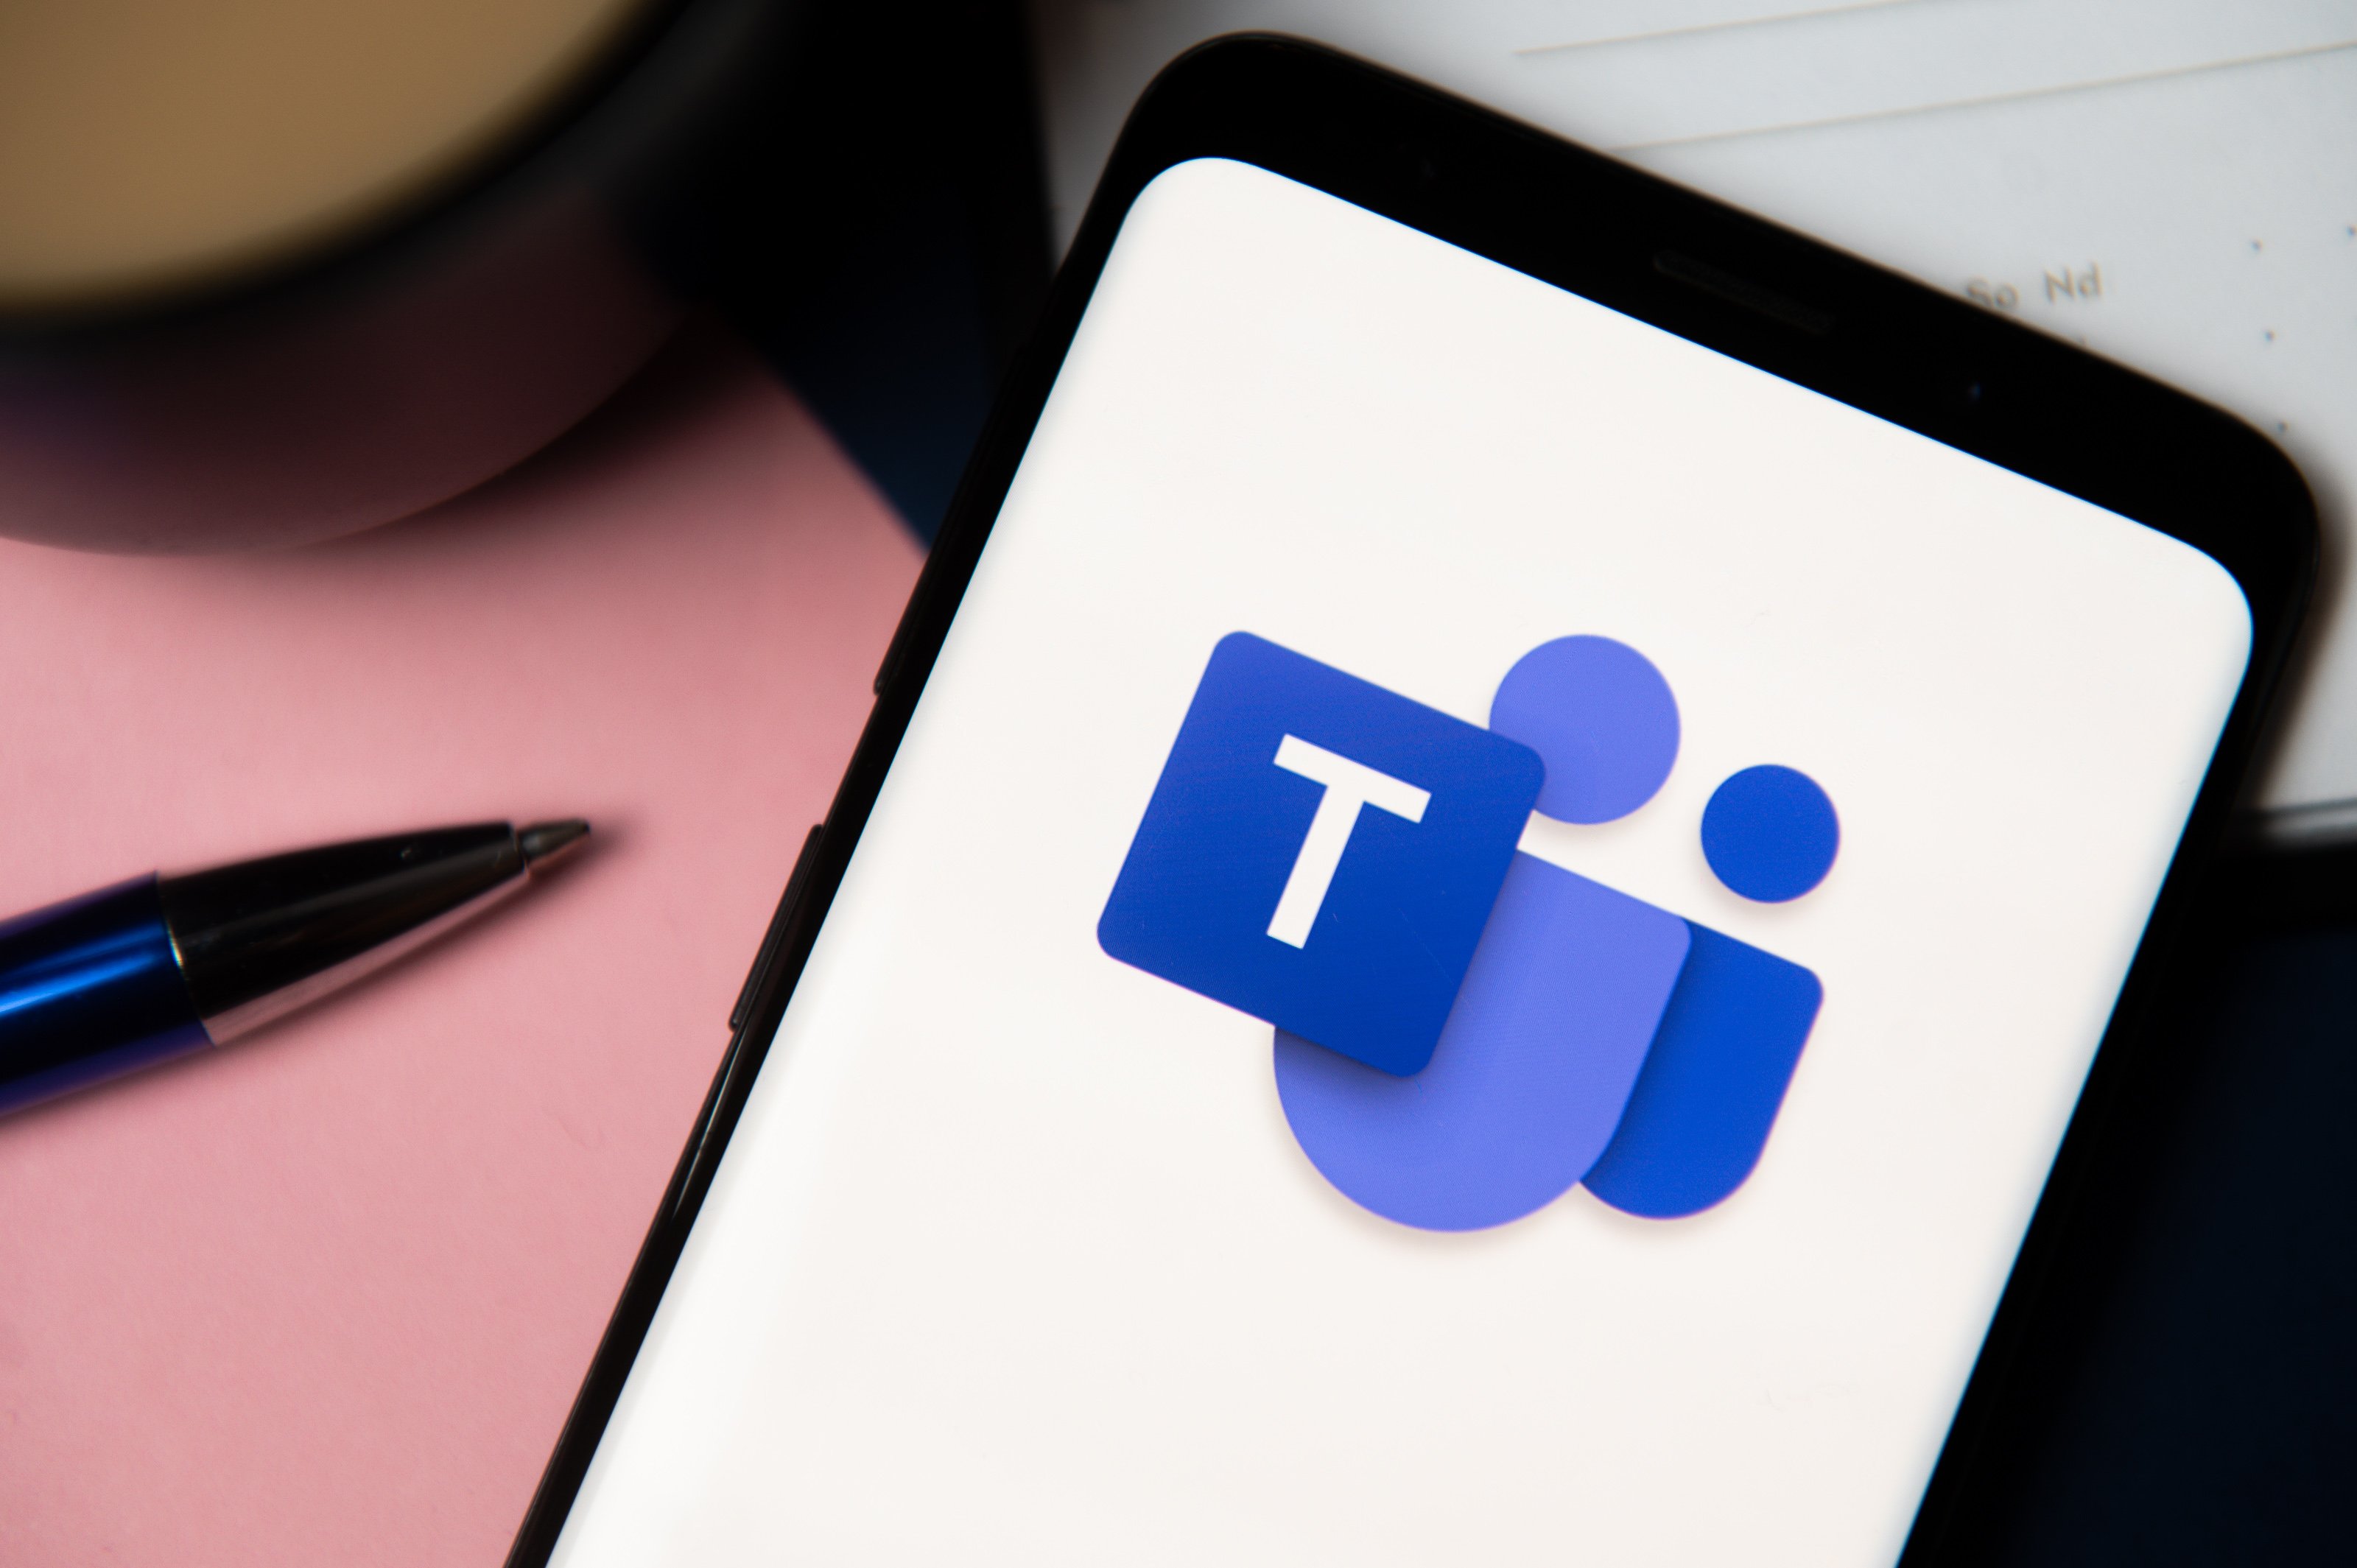 What’s coming to Microsoft Teams Phone this month?